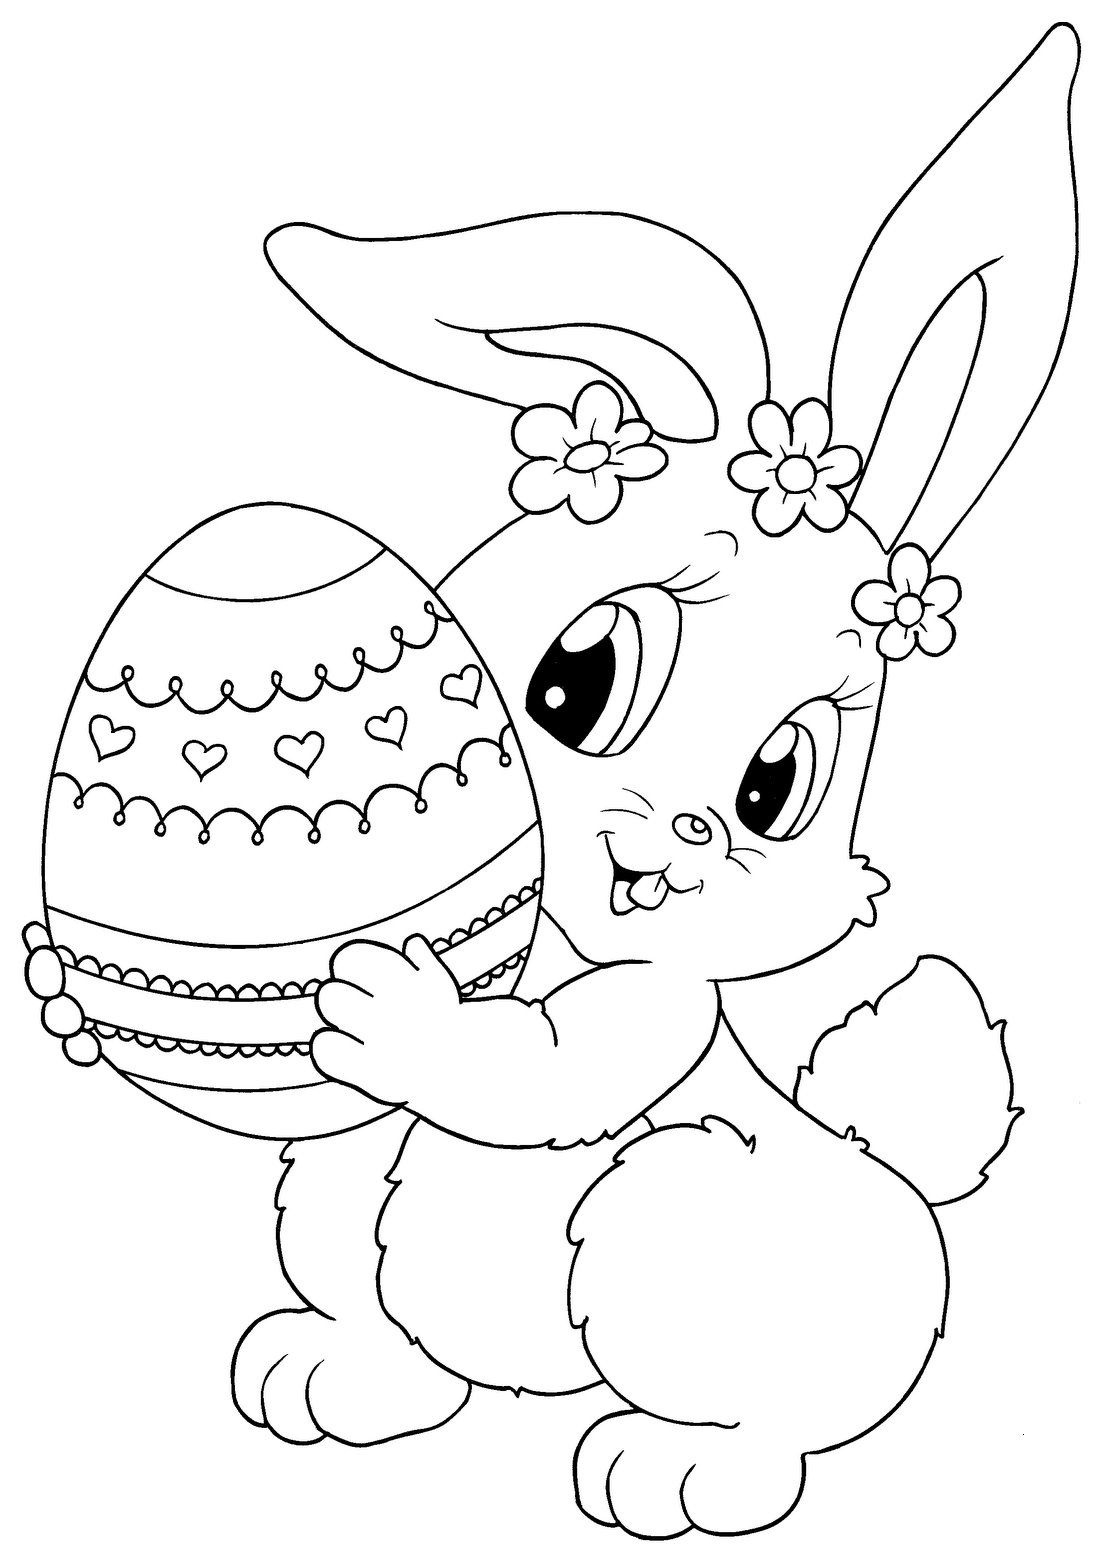 Download 7 Places For Free, Printable Easter Egg Coloring Pages ...